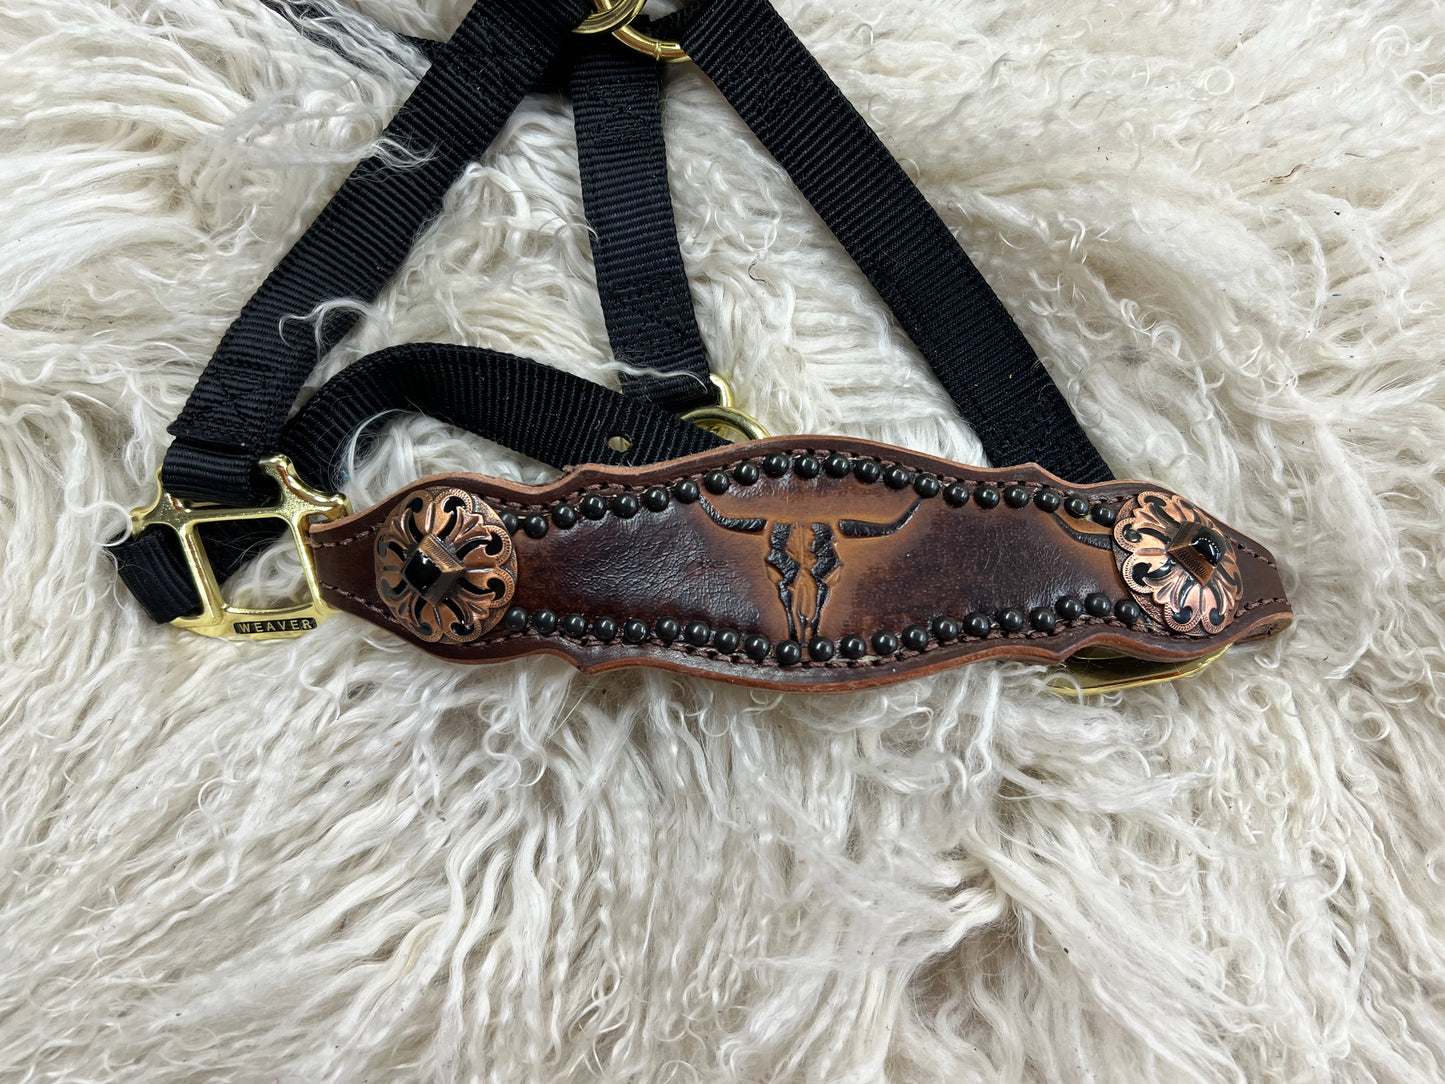 Brown longhorns on chocolate harness leather